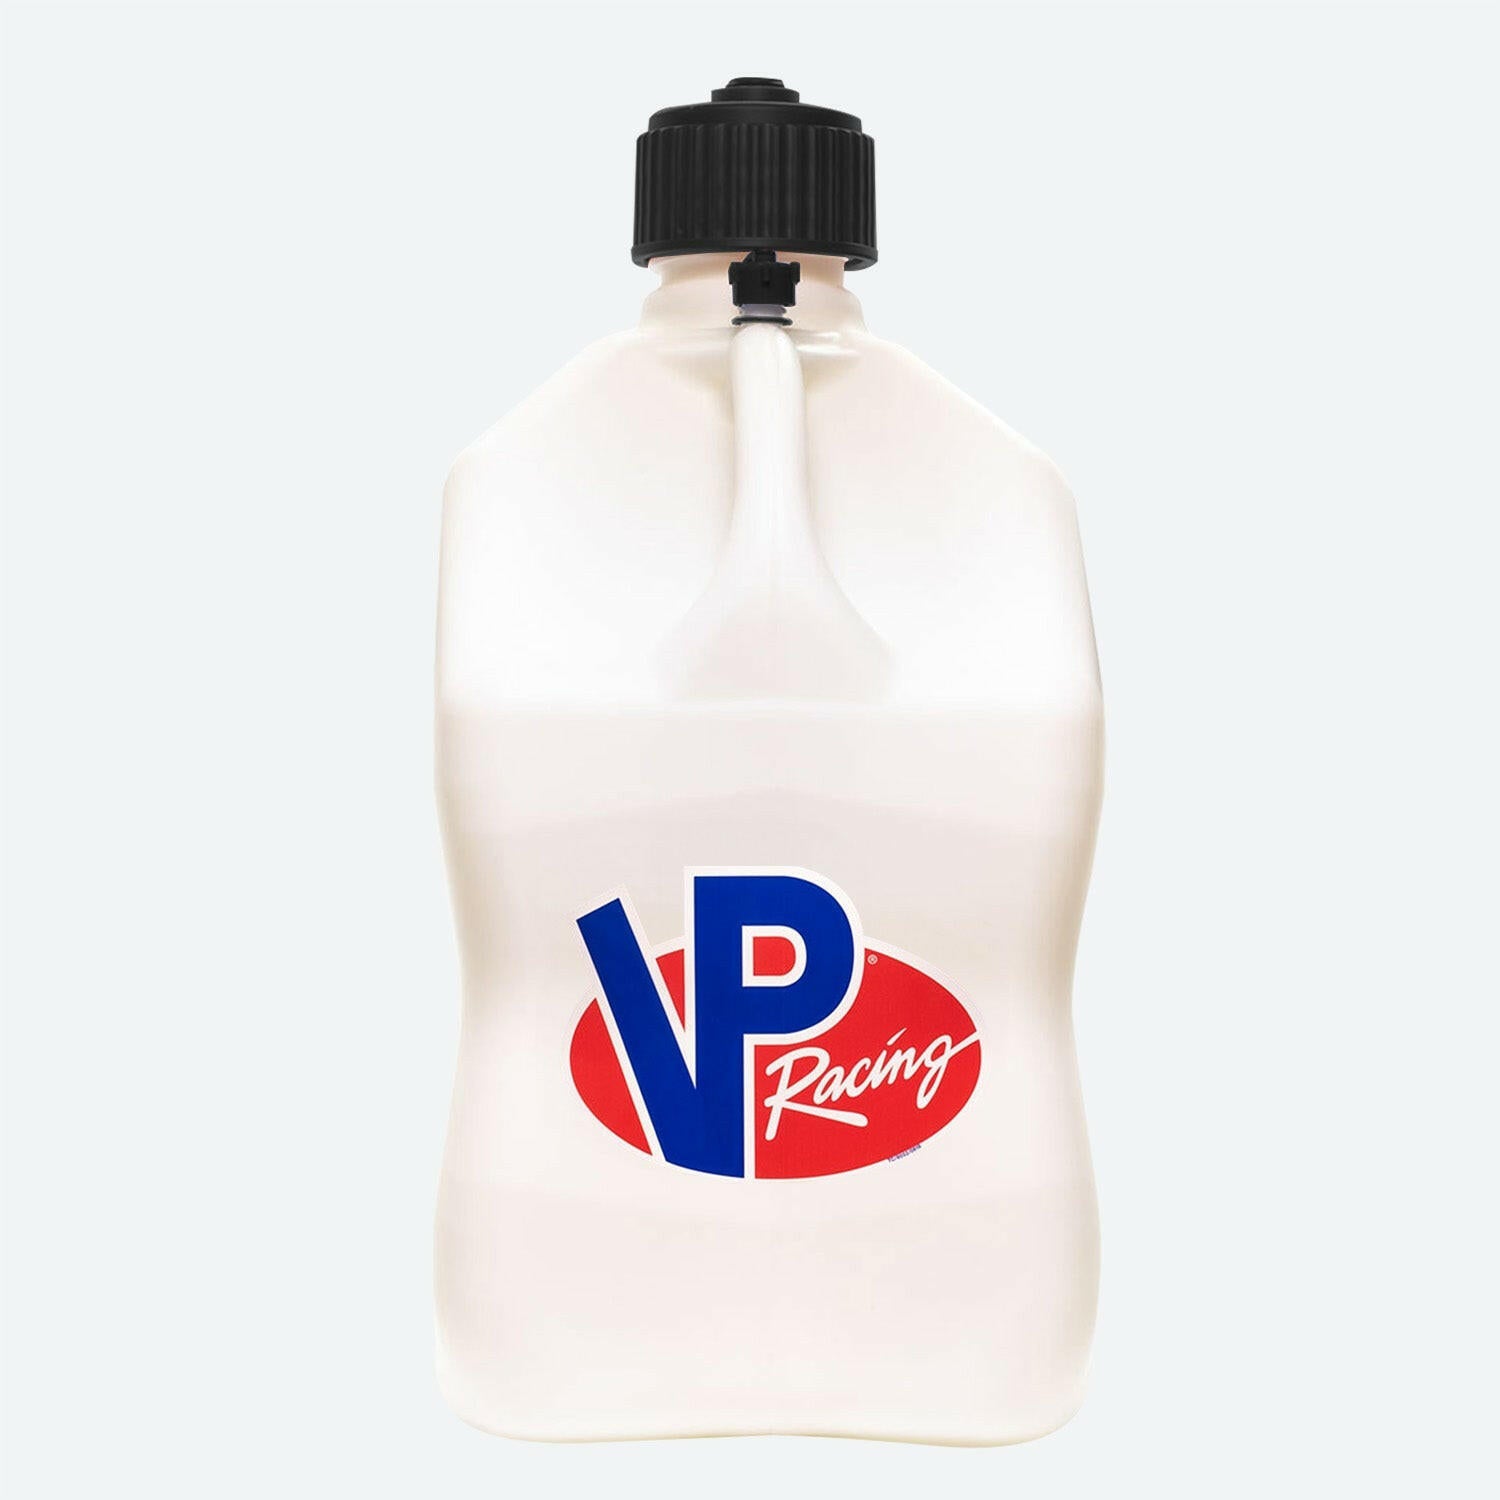 A white plastic 5.5-Gallon Motorsport Container® utility jug - Square with a black screw cap and a spout, featuring the blue and red VP Racing logo on the front.